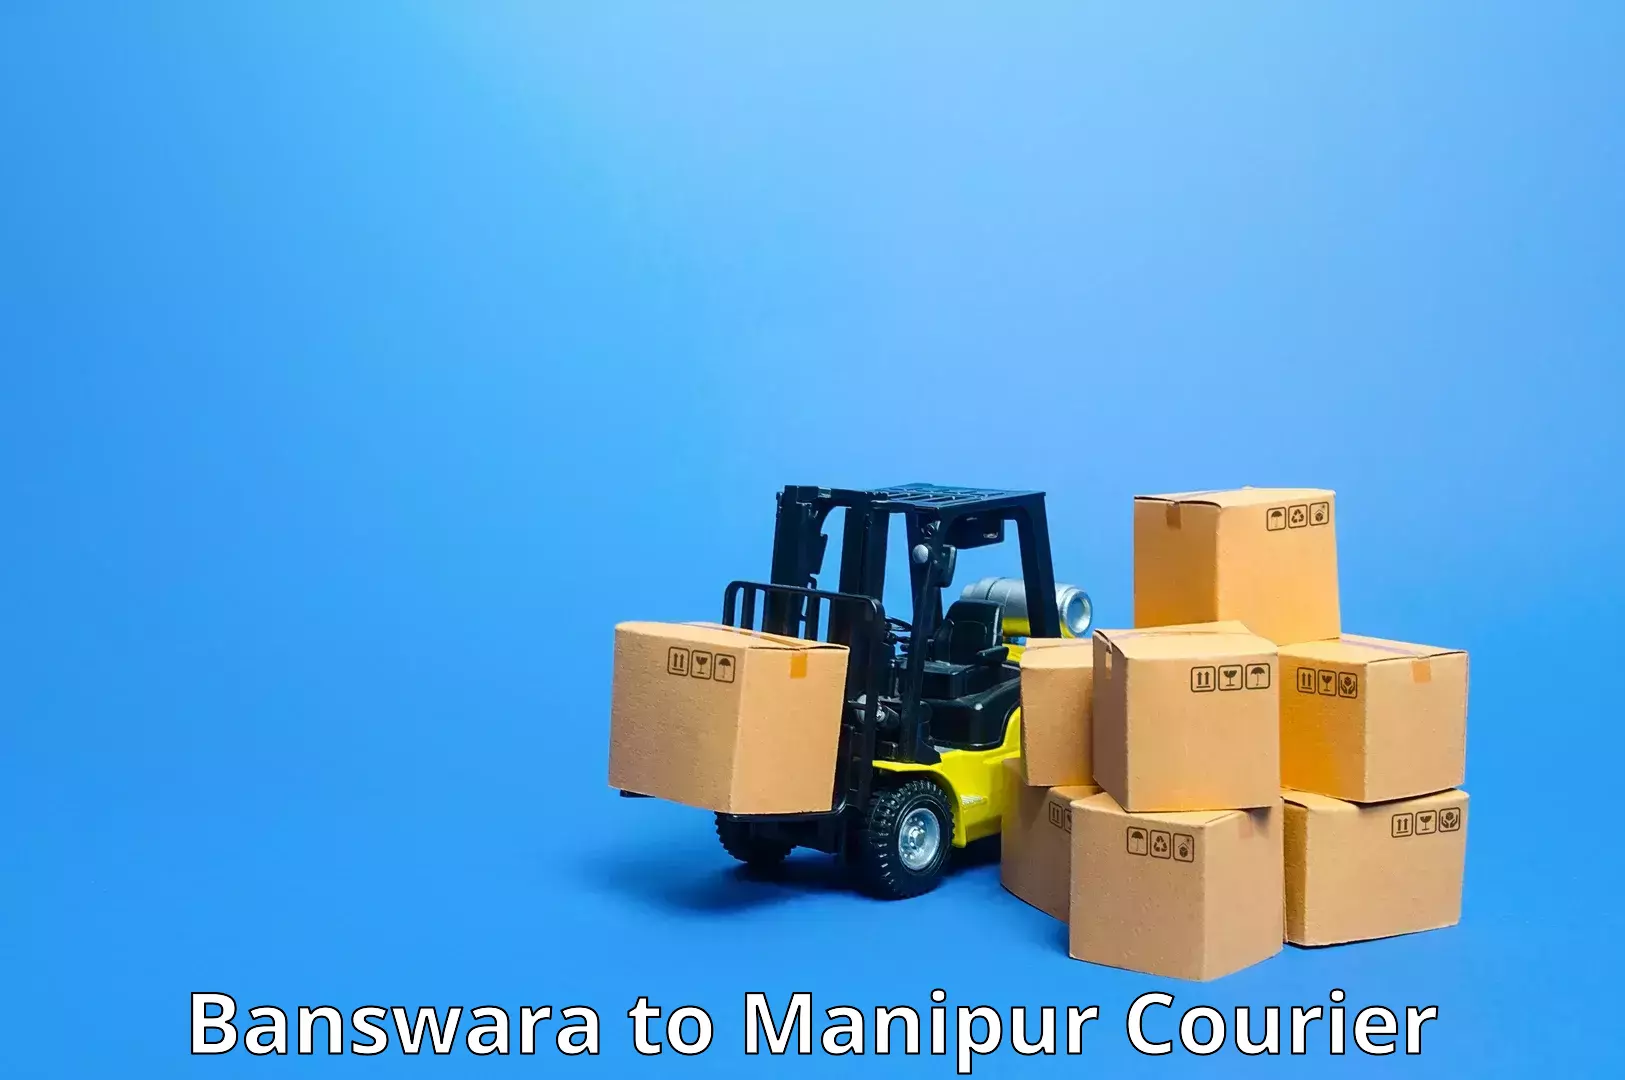 Flexible delivery scheduling in Banswara to Manipur